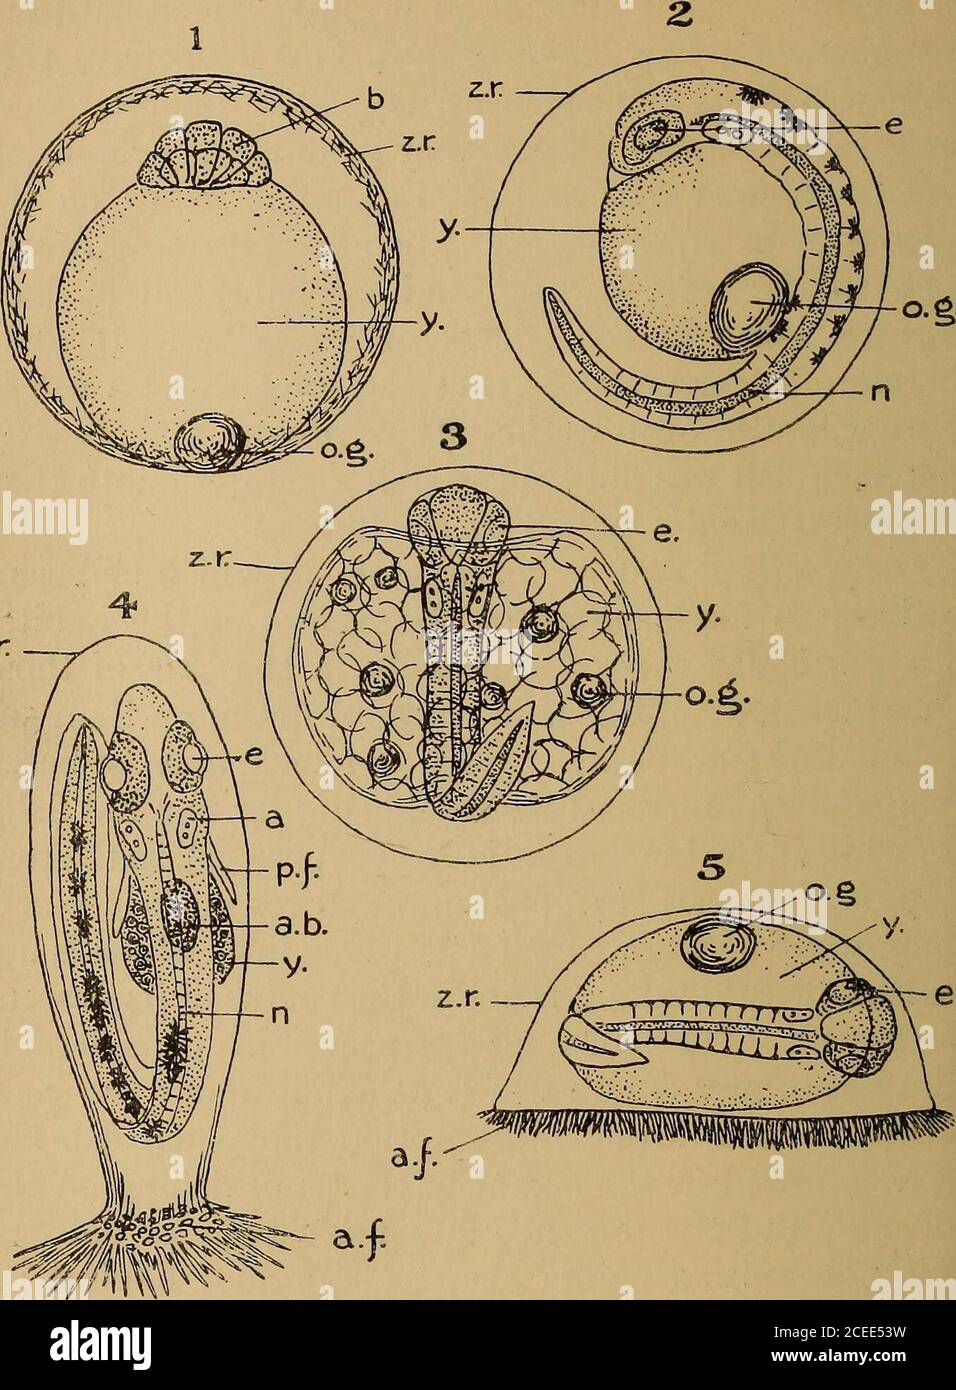 . Science of the sea. An elementary handbook of practical oceanography for travellers, sailors, and yachtsmen. edupon a shape unsuited for pelagic life (as in a flat fish),or for life at the bottom (as in Argyropelecus), as the casemay be ; or, again, by constant captures in surface netsor by some instrument such as a long line, which is notwell adapted to taking fishes in the course of its descentor ascent. The constant presence in considerablenumbers of any fish in trawls fished at about the samedepth raises a strong presumption that such fish hasbeen captured in the ordinary course of fishi Stock Photo